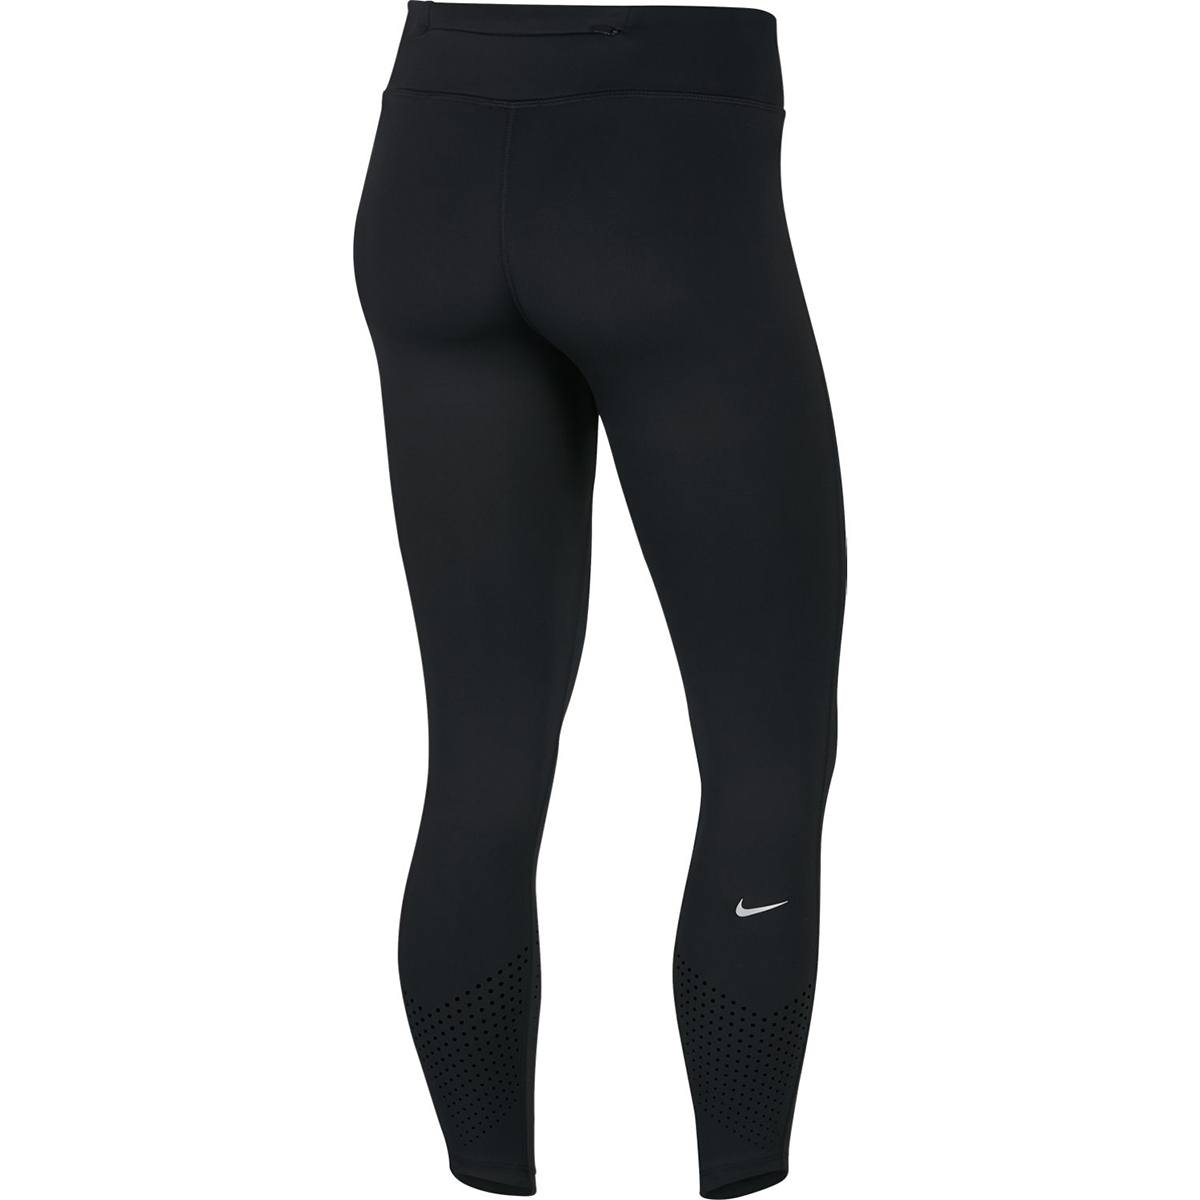 Nike Epic Lux Tight, , large image number null